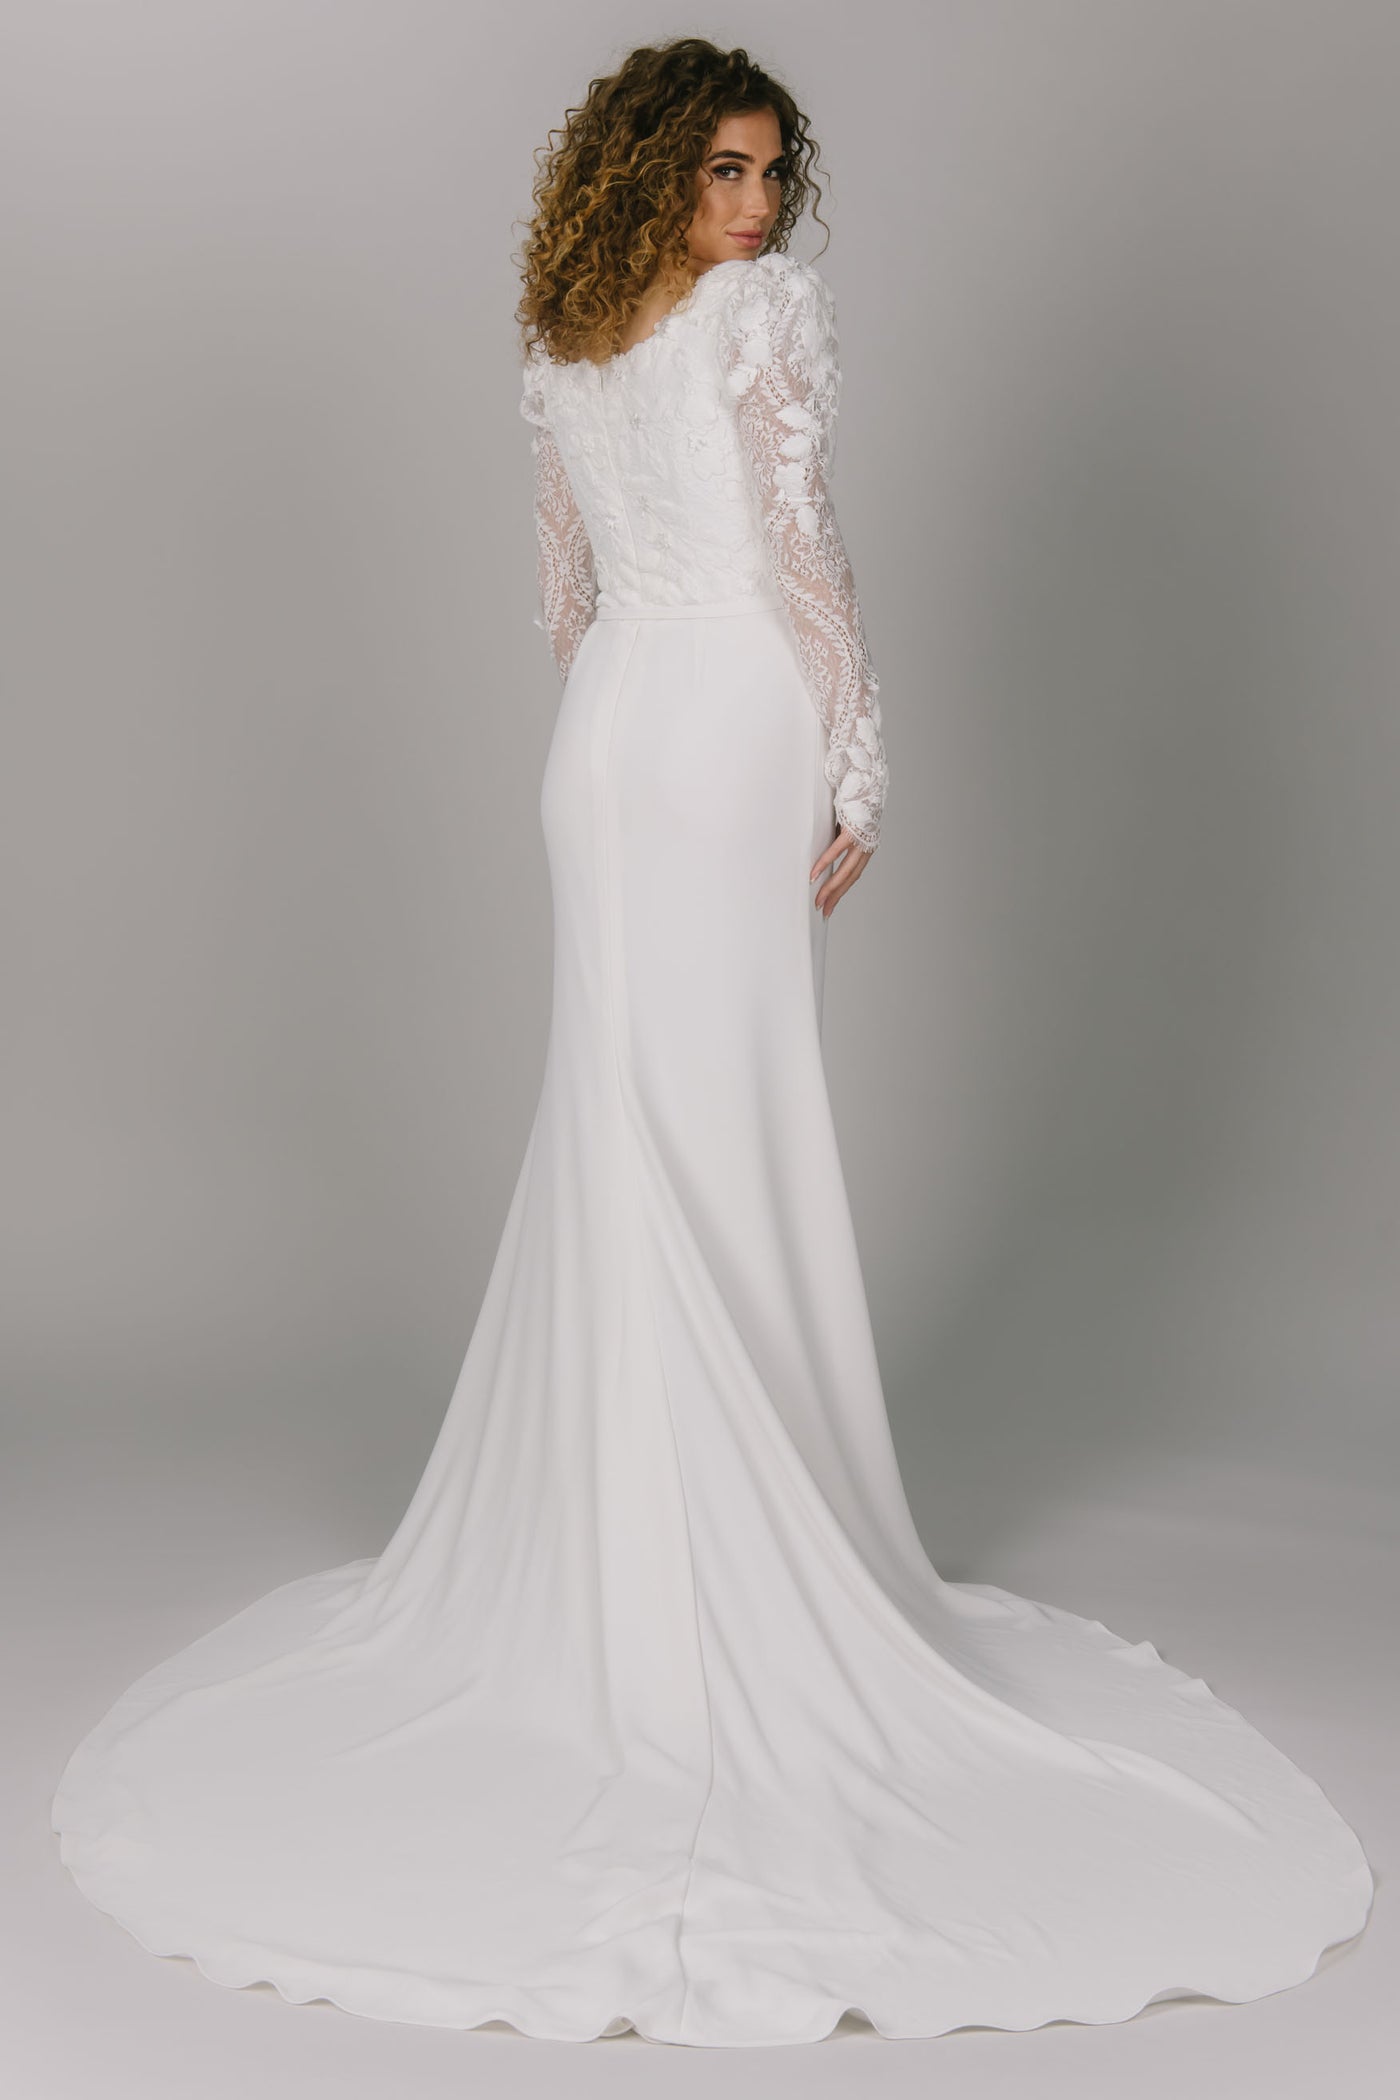 Back view of modest wedding dress with sleeves. It has lace puff sleeves and a sweetheart neckline. It has a simple skirt with a slit. This modest wedding gown comes with a bow belt.